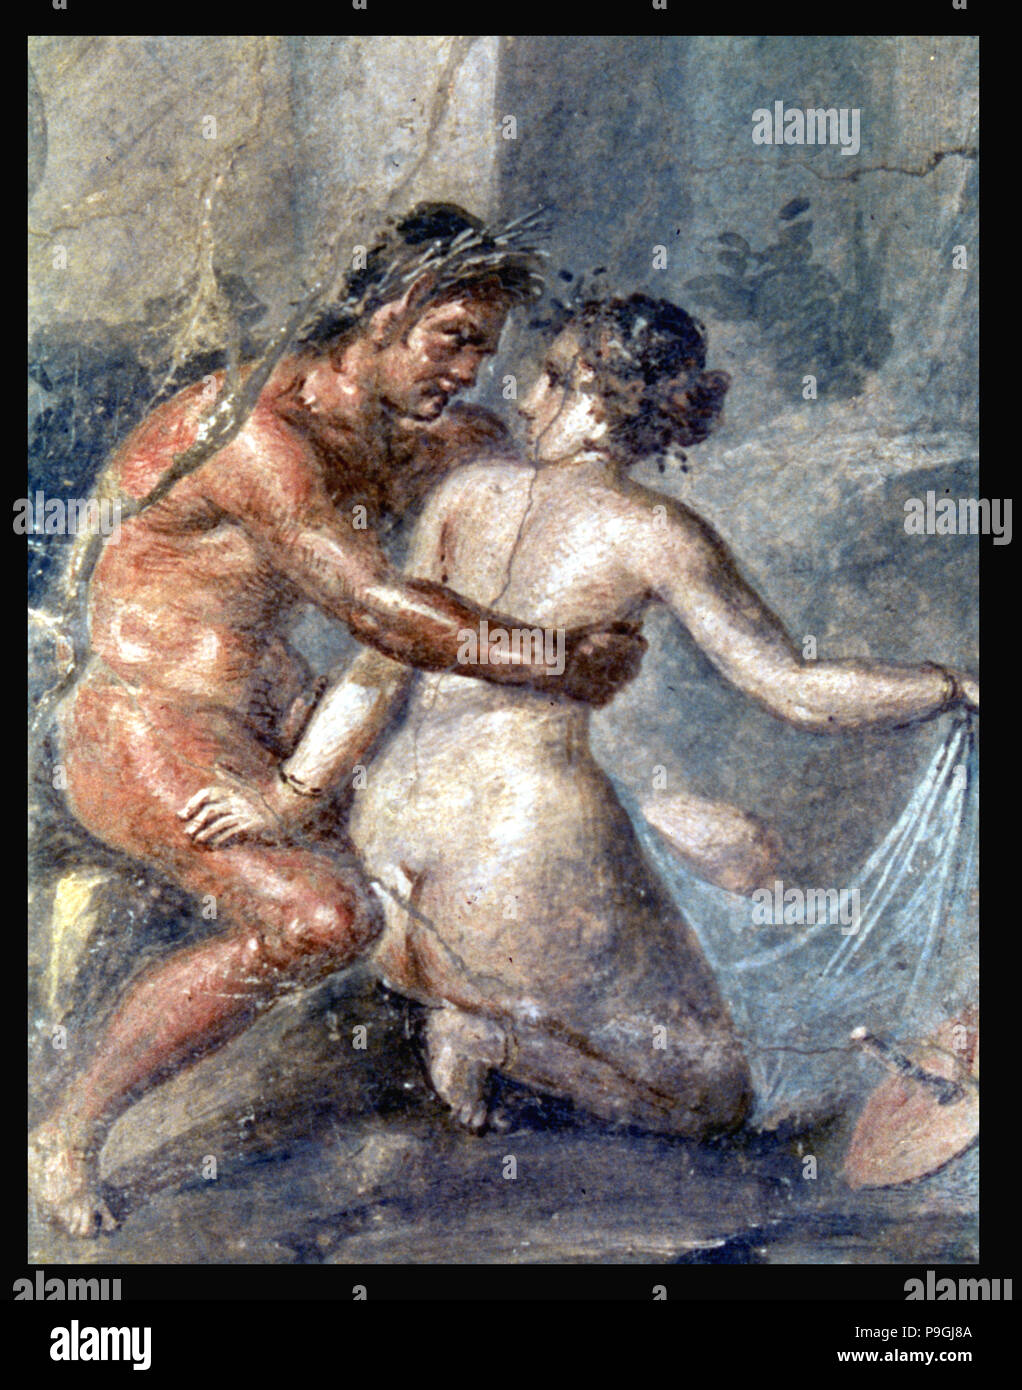 Satyr embracing a nymph, fresco from the house of Epigram at Pompeii. Stock Photo